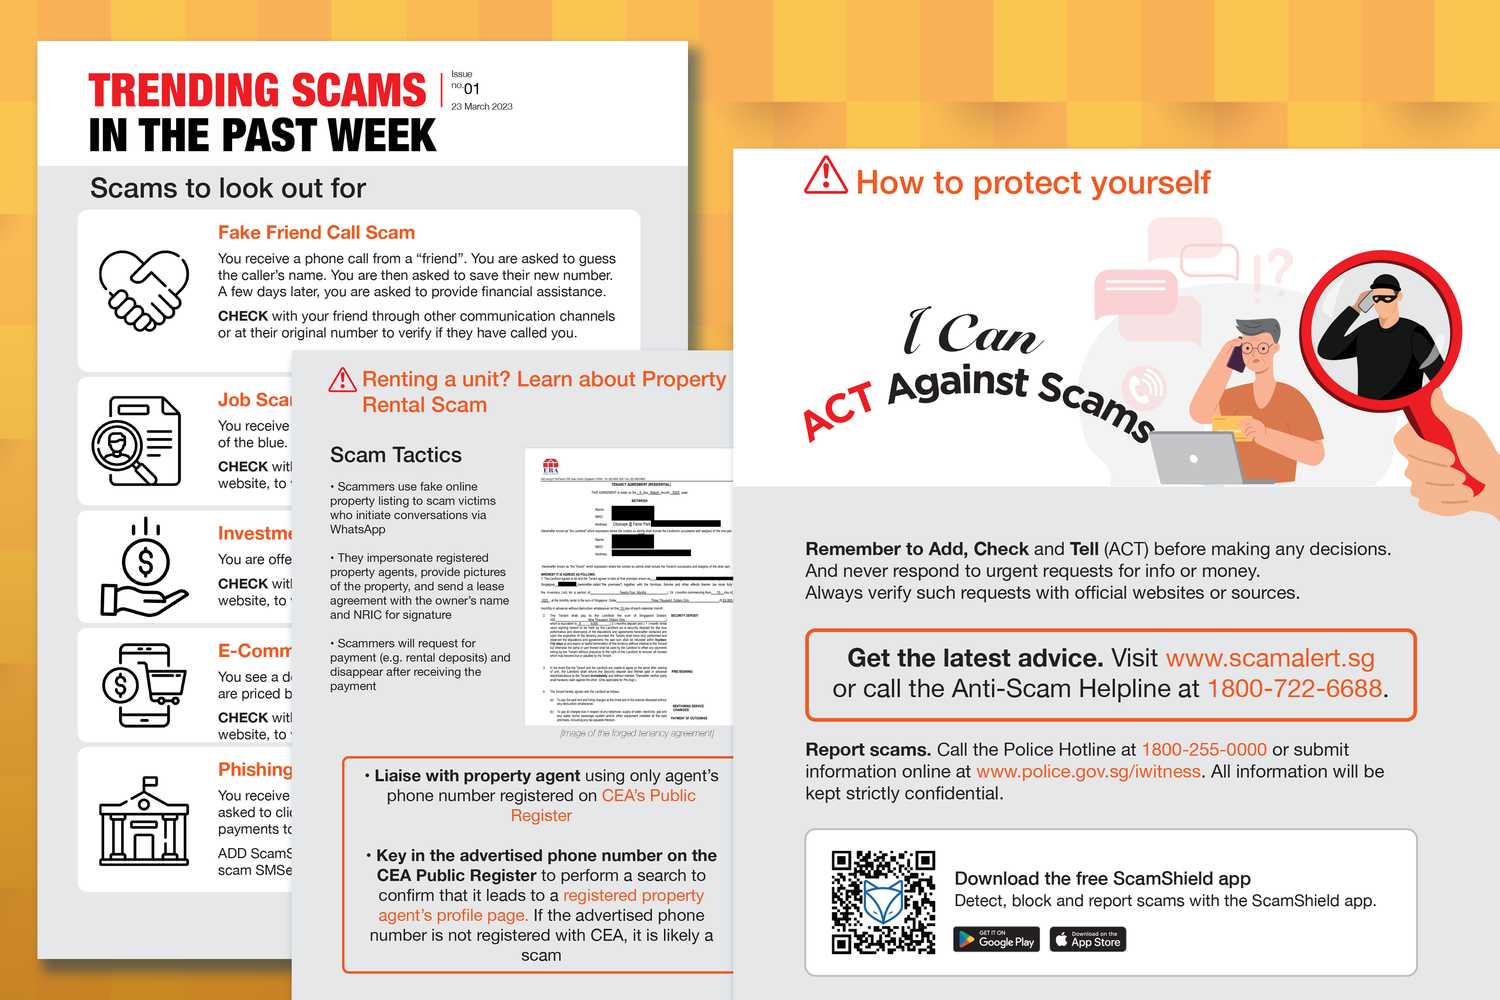 The SPEO’s Scams Bulletin is shared on the SPF’s social media platforms every week.